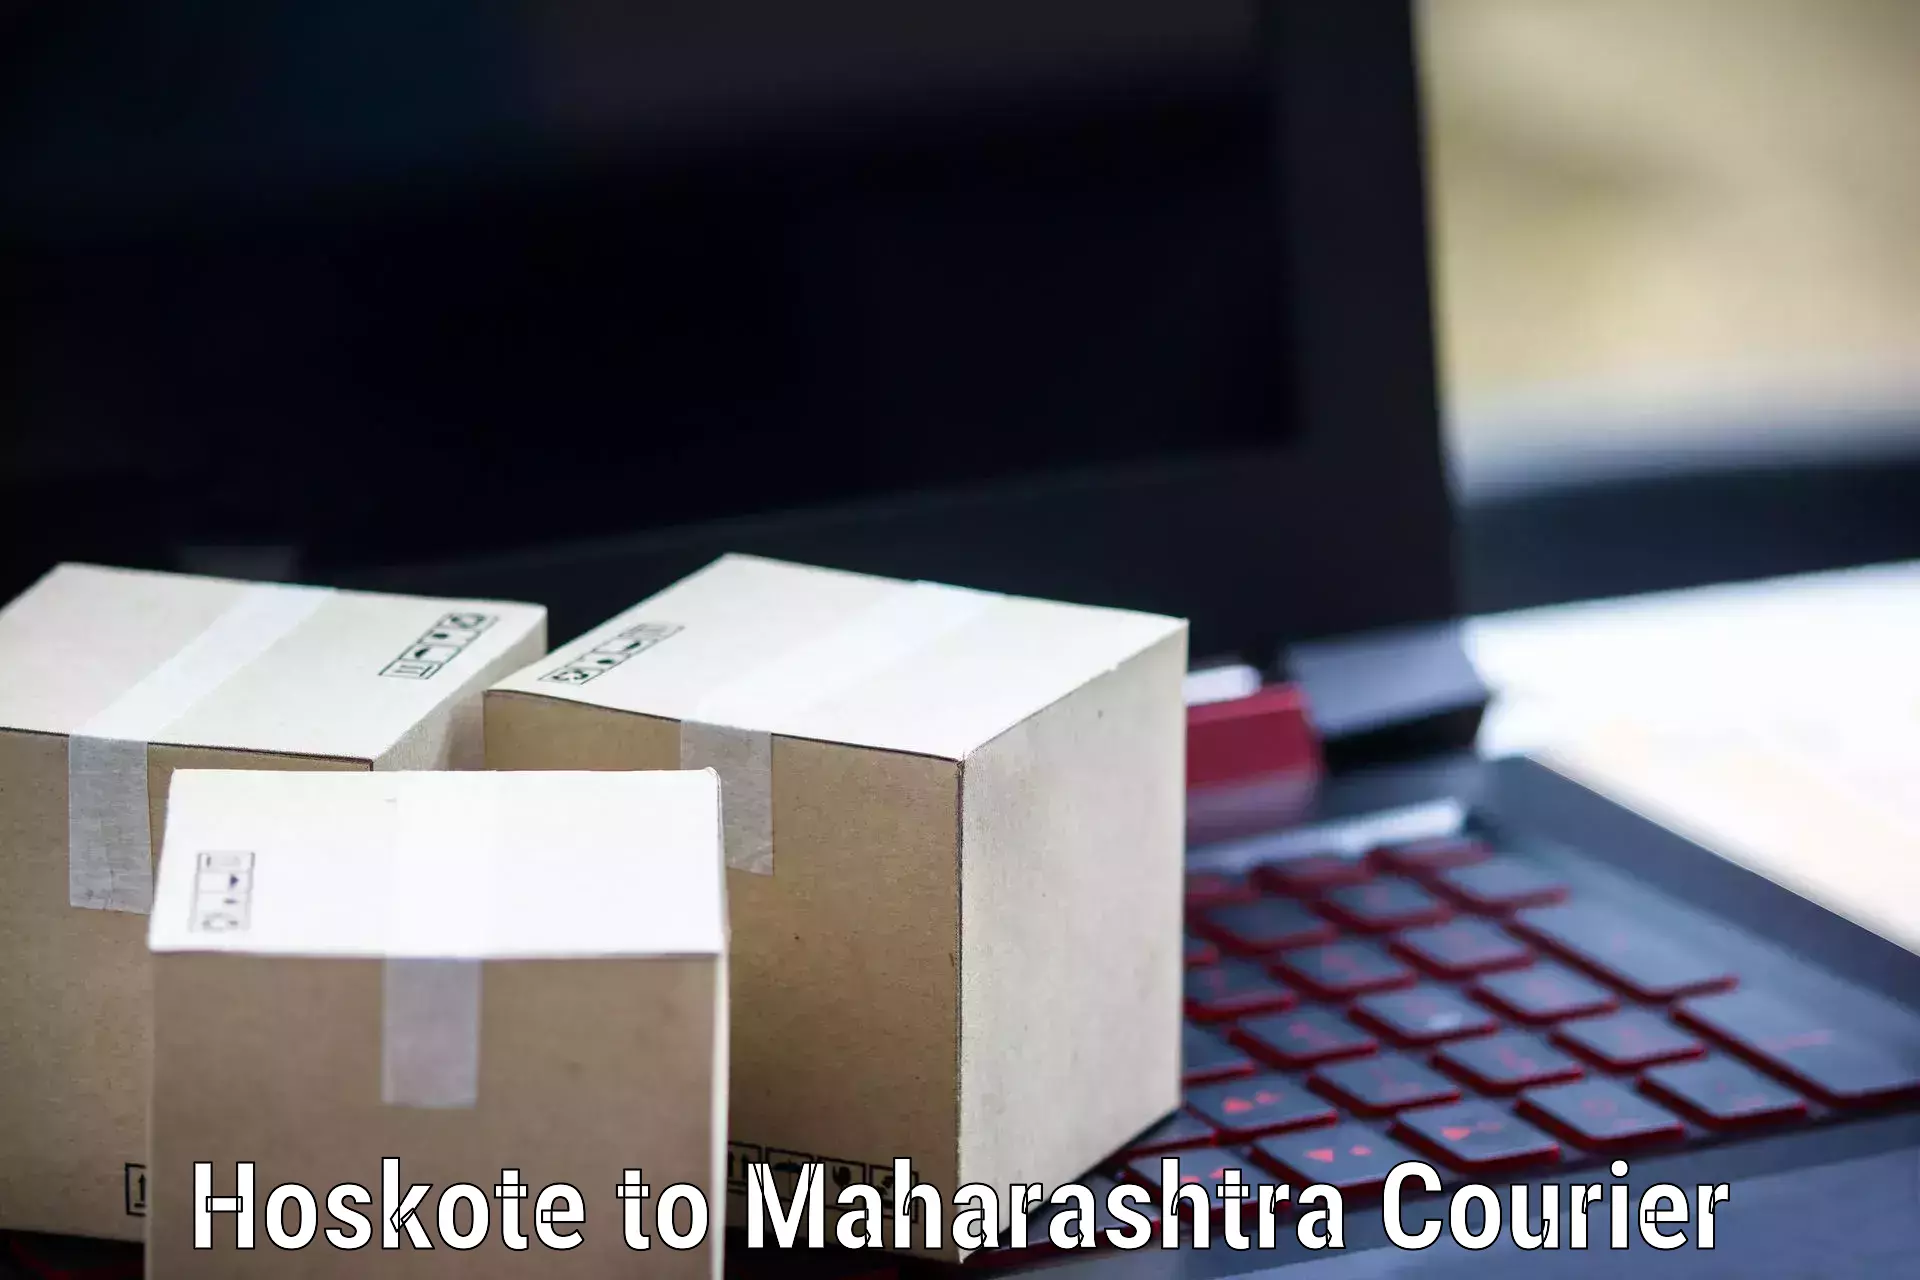 On-demand shipping options Hoskote to Chandrapur